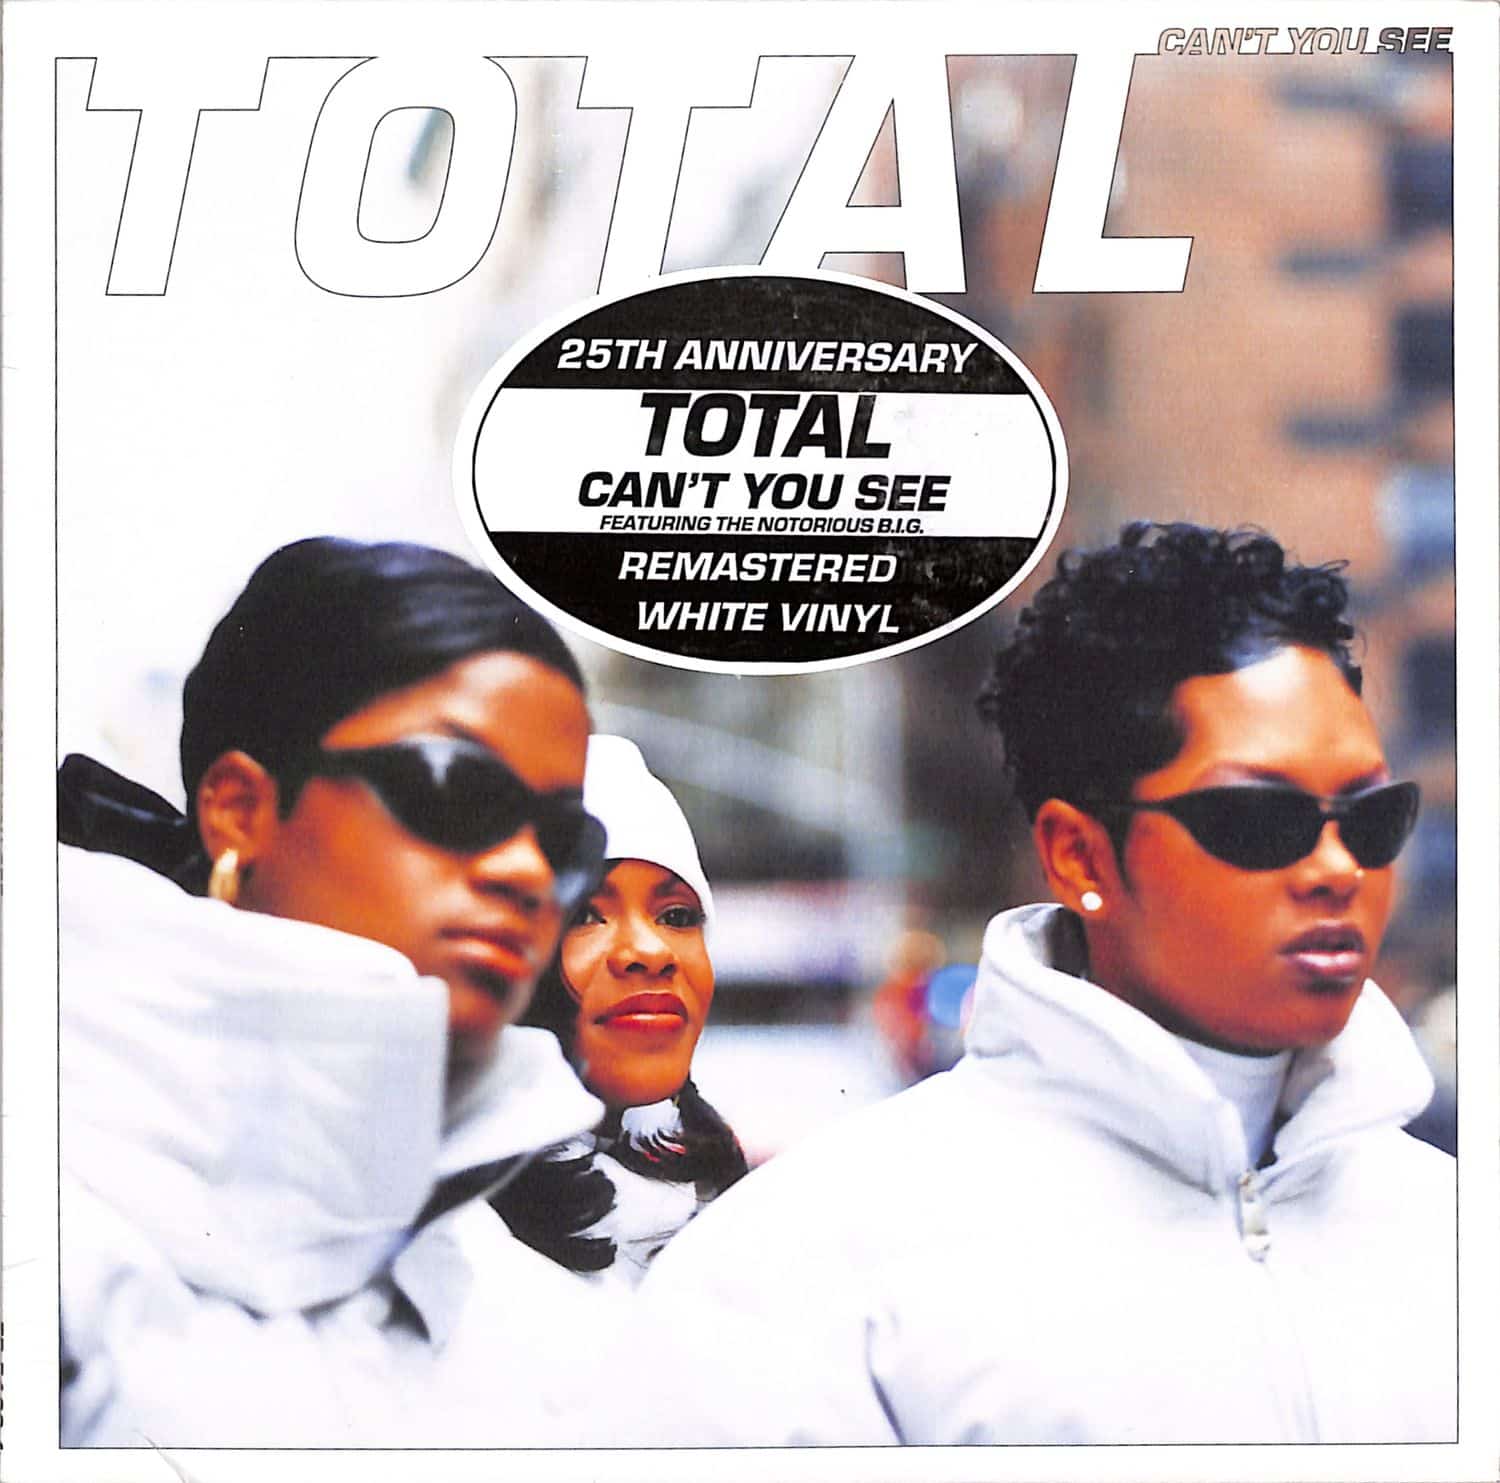 Total - CANT YOU SEE 